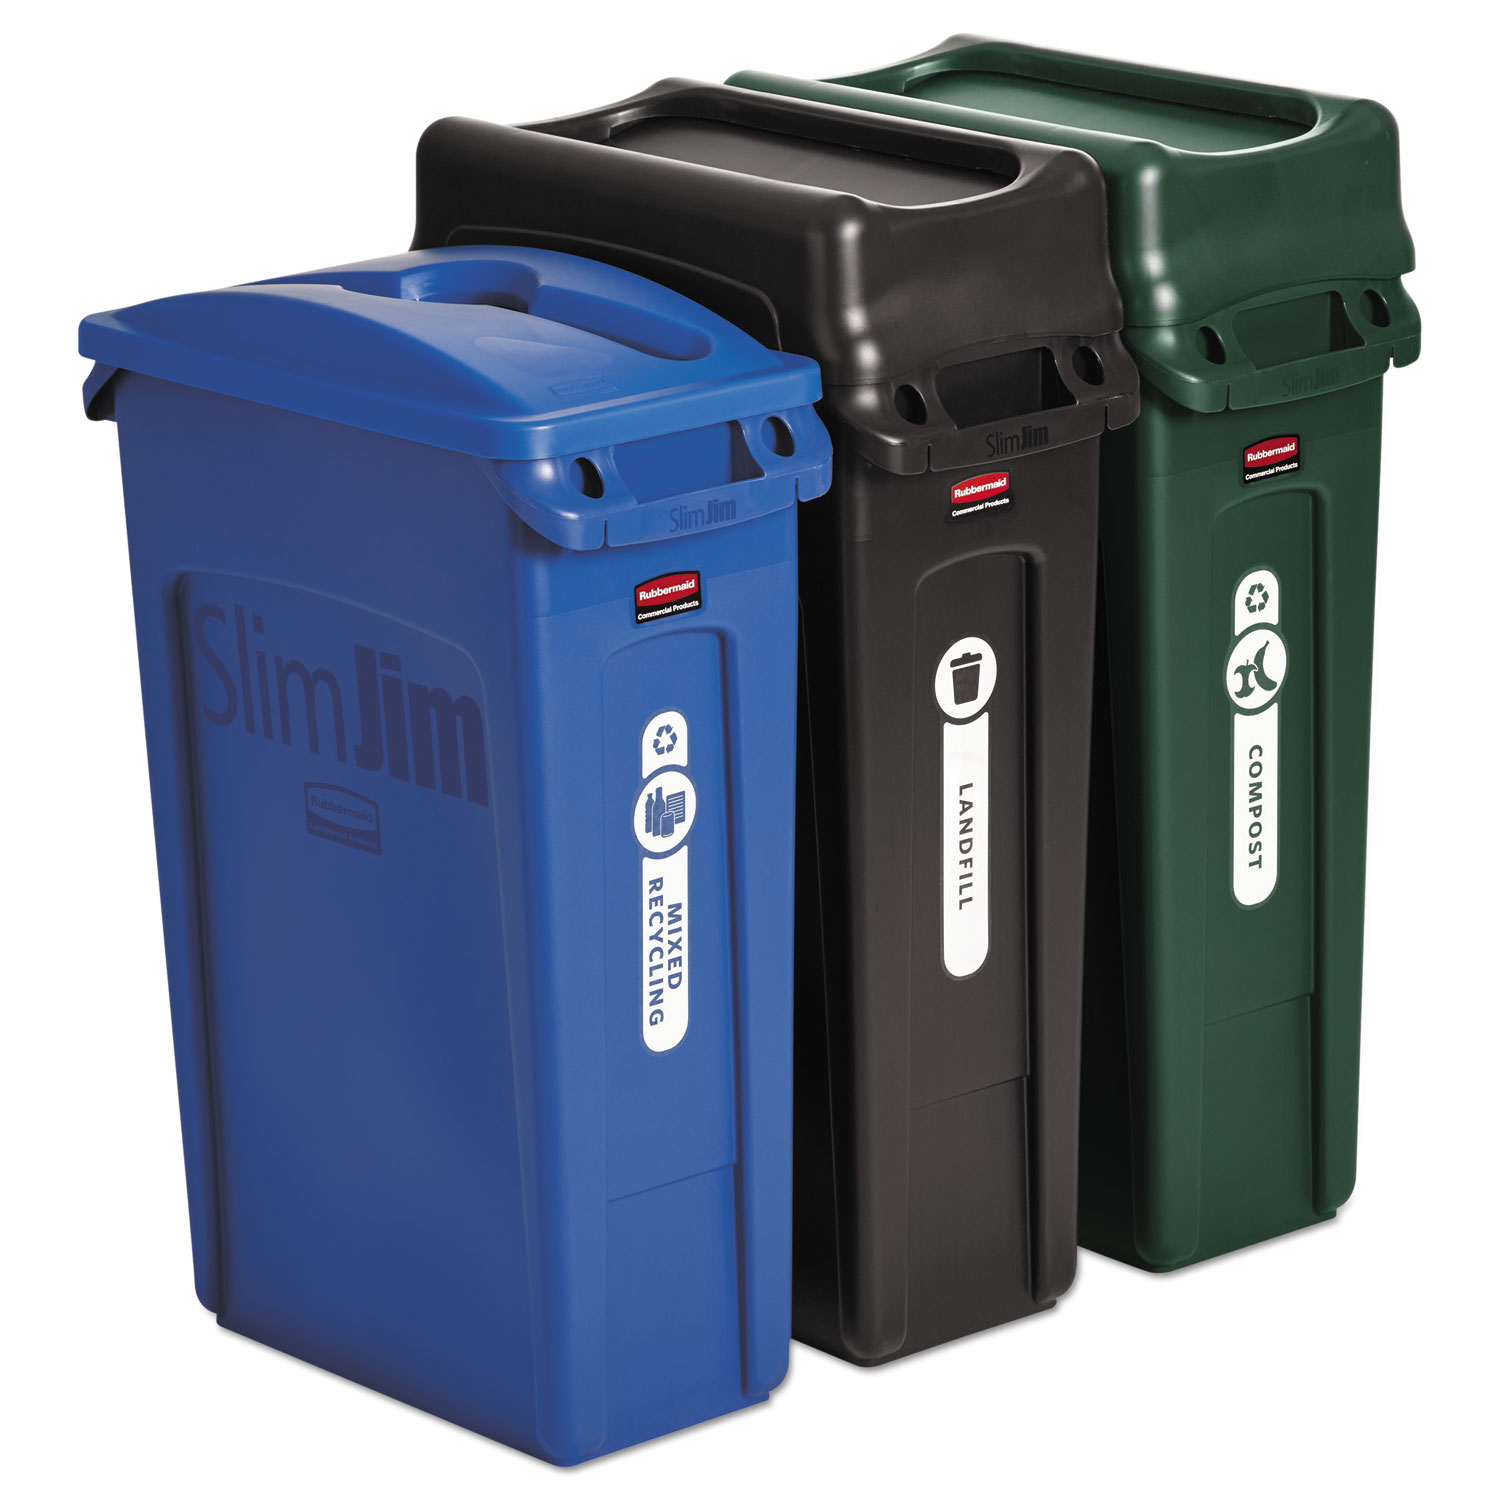  Rubbermaid Commercial 1998897 Slim Jim Recycling Container, Rectangular, 23 gal, Black/Blue/Green (RCP1998897) 